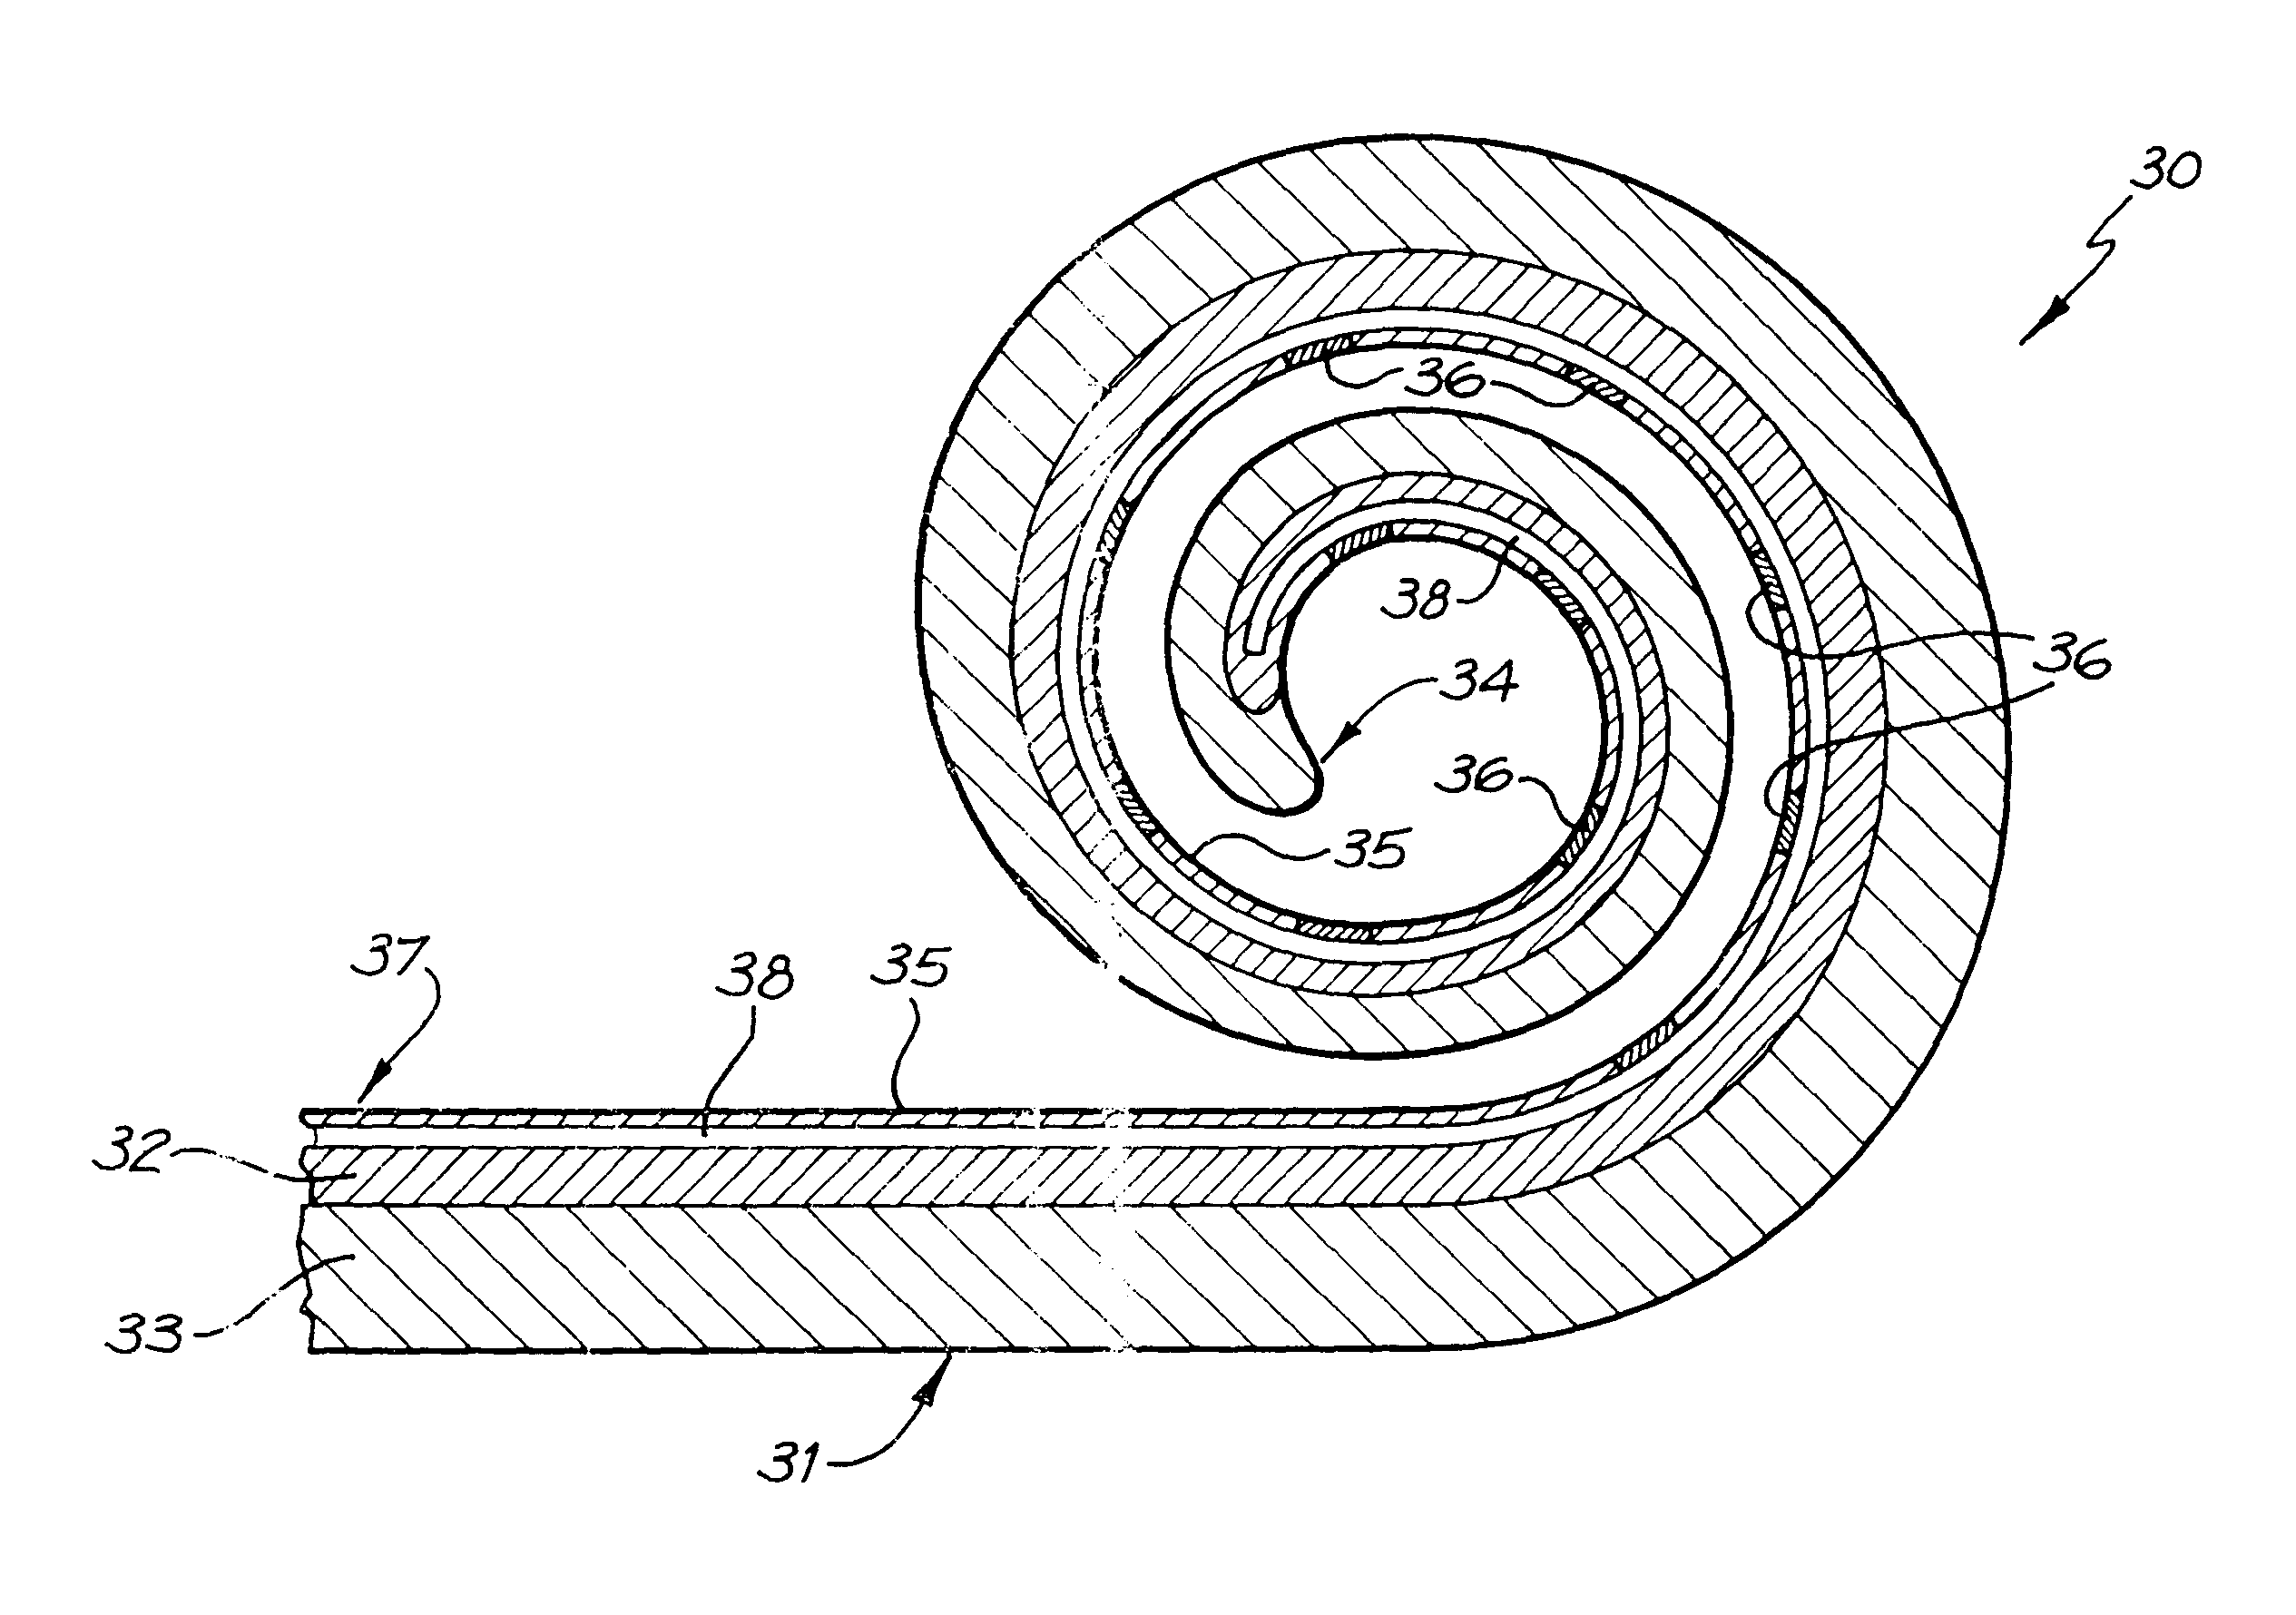 Pre-curved cochlear implant electrode array